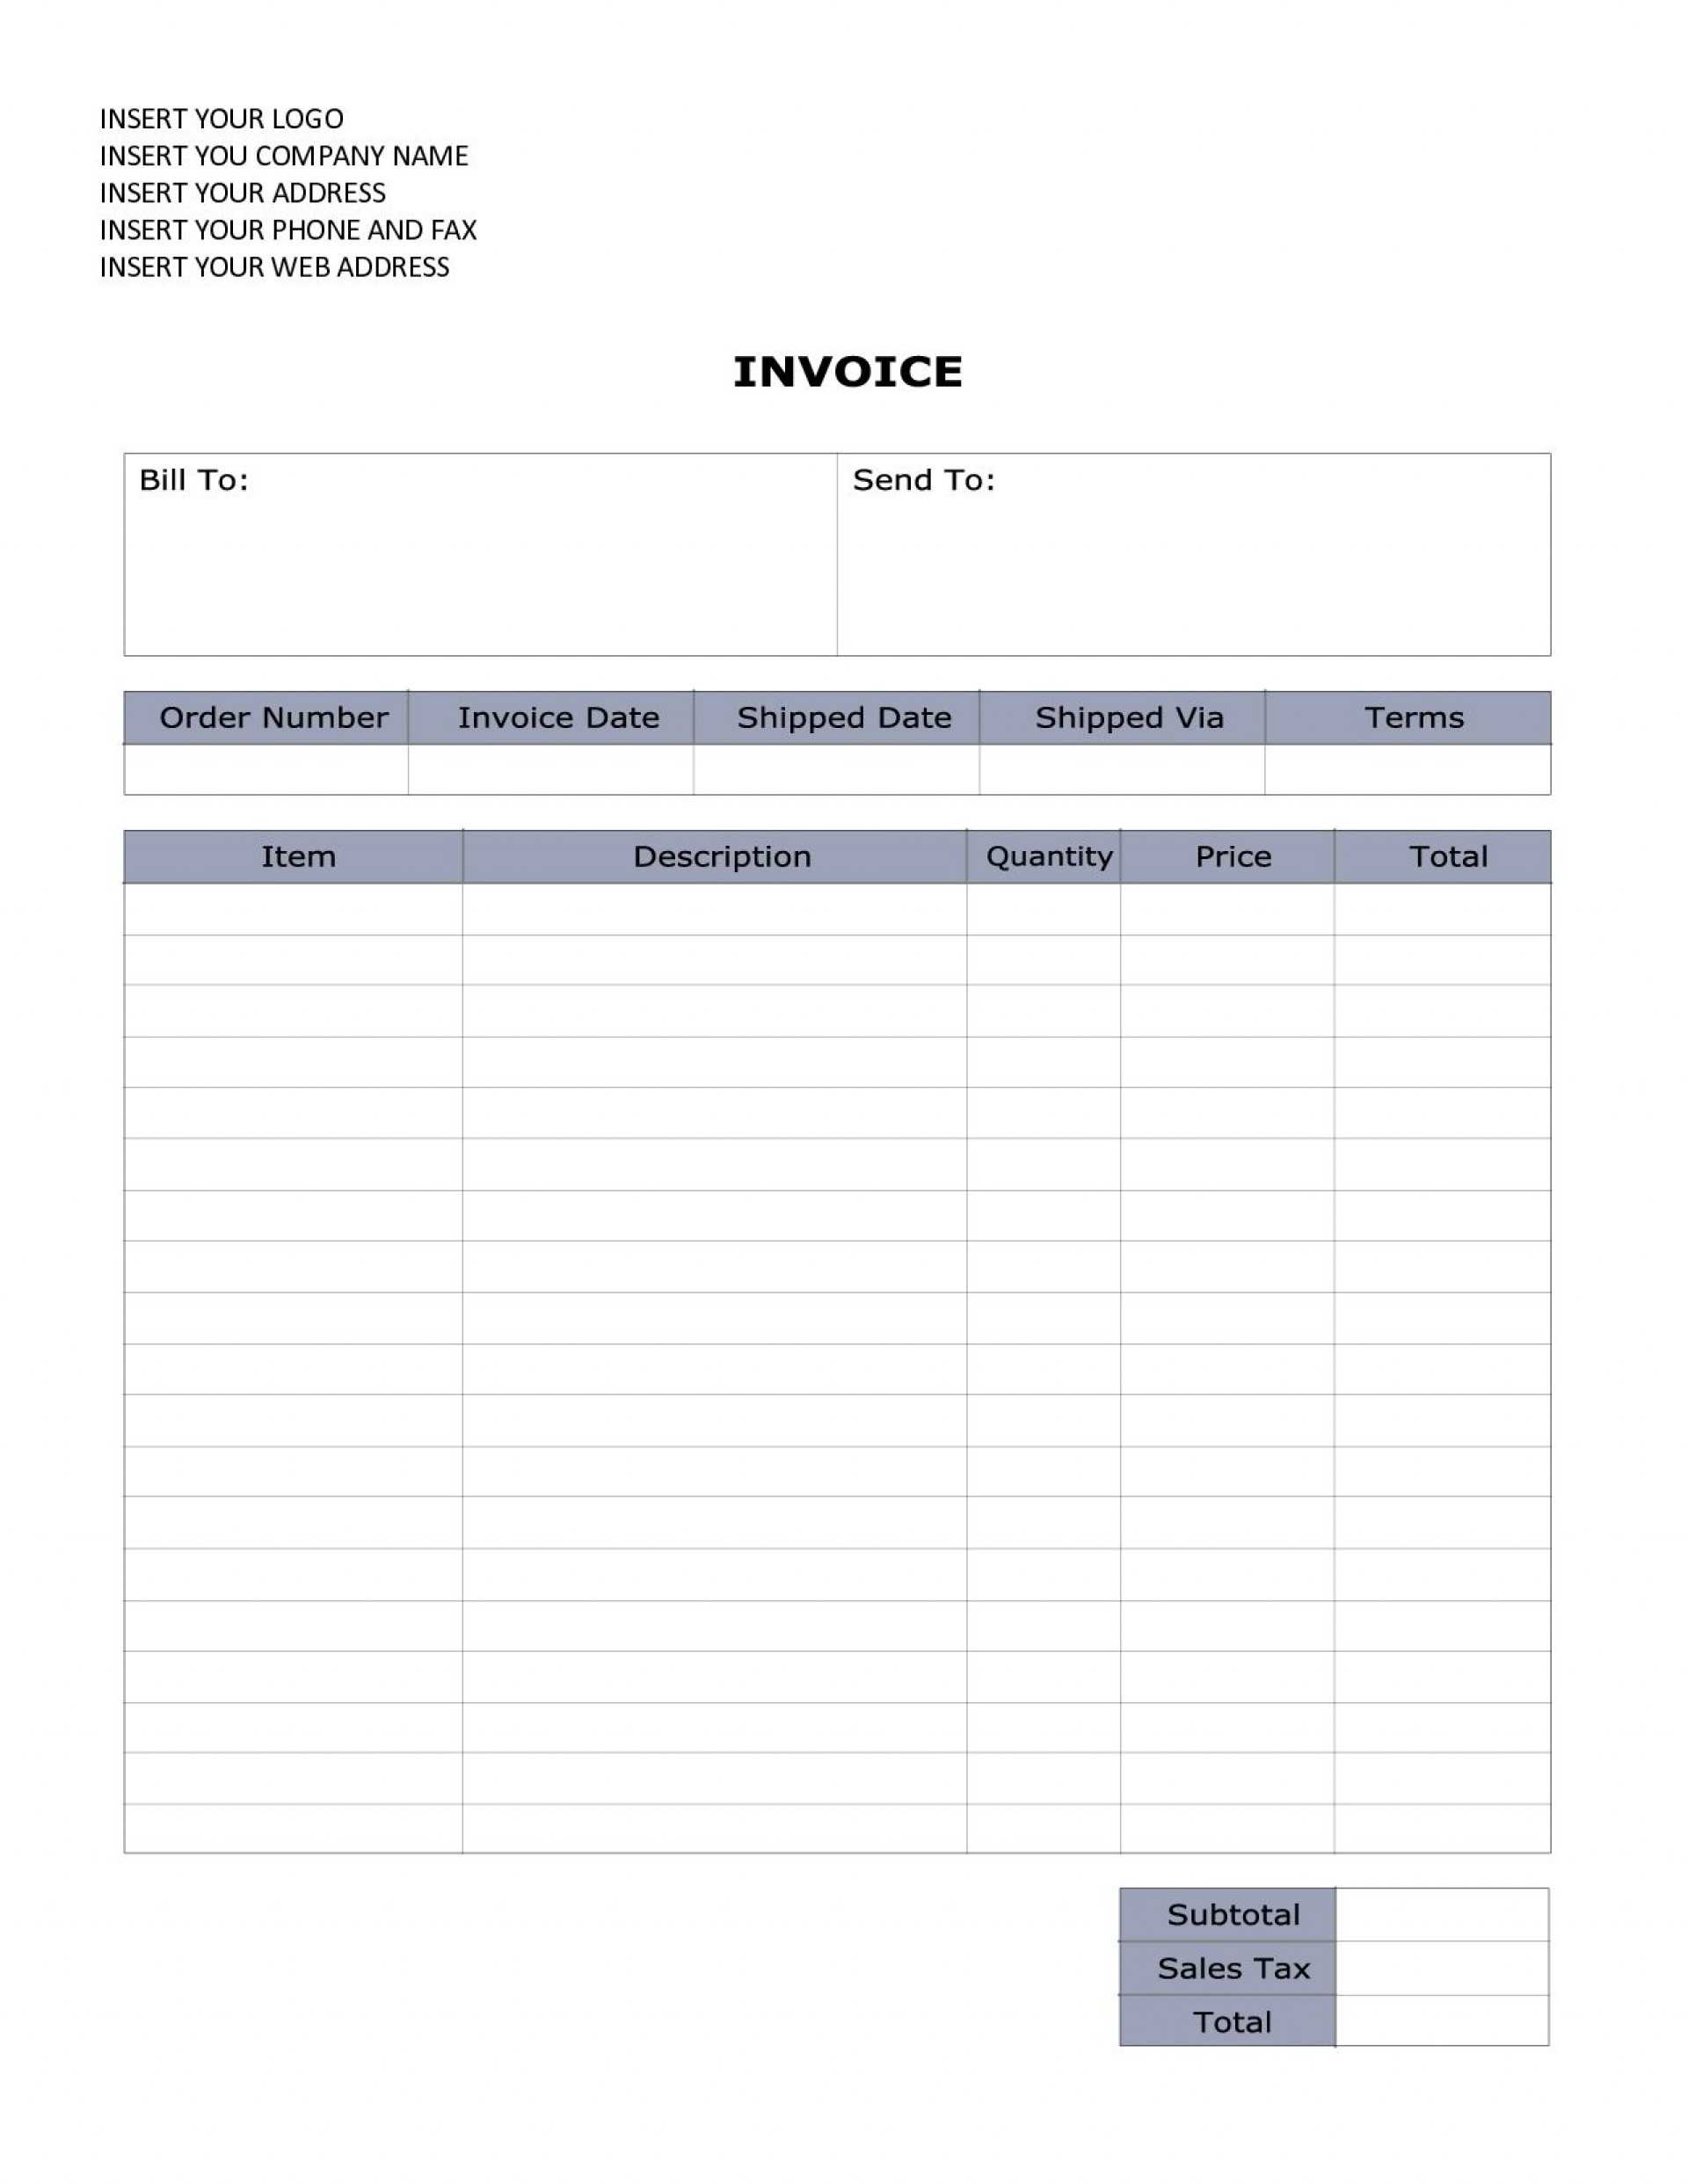 035 Blank Invoice Template Word Lovely For Microsoft Mughals Throughout Invoice Template Word 2010